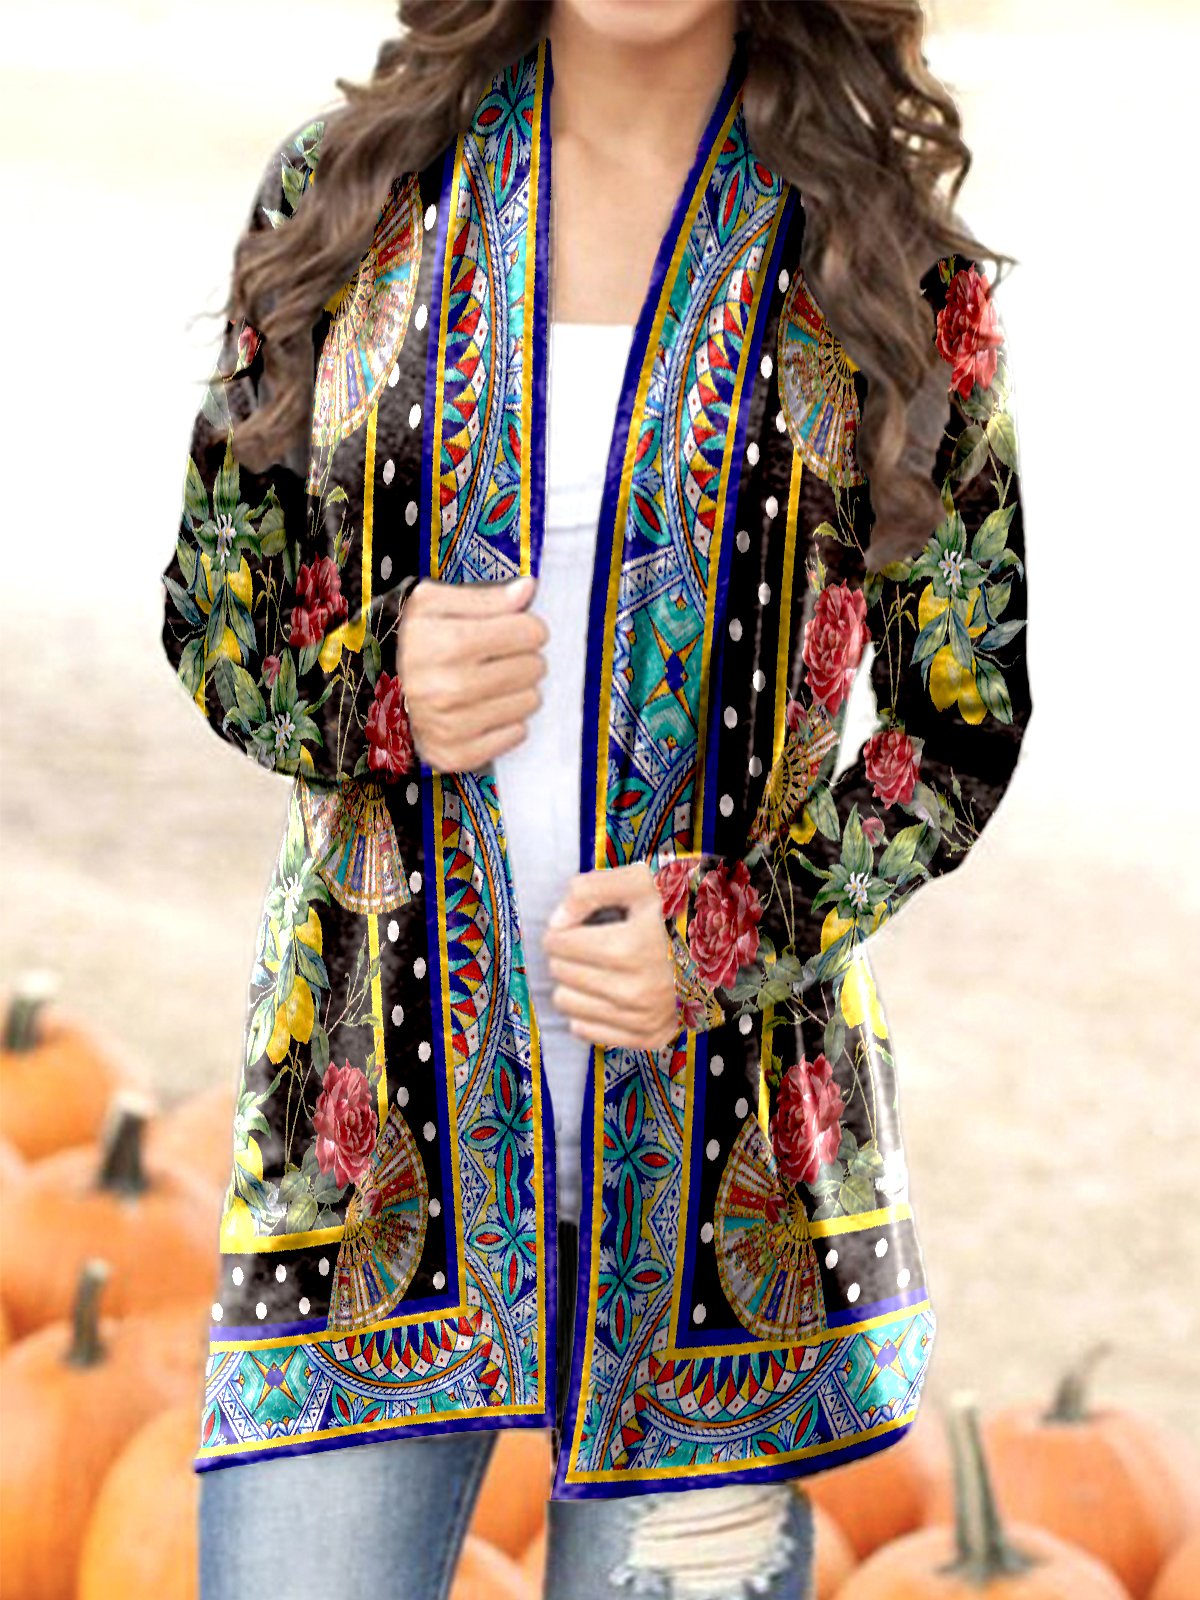 Loose Jersey Floral Casual Cardigans